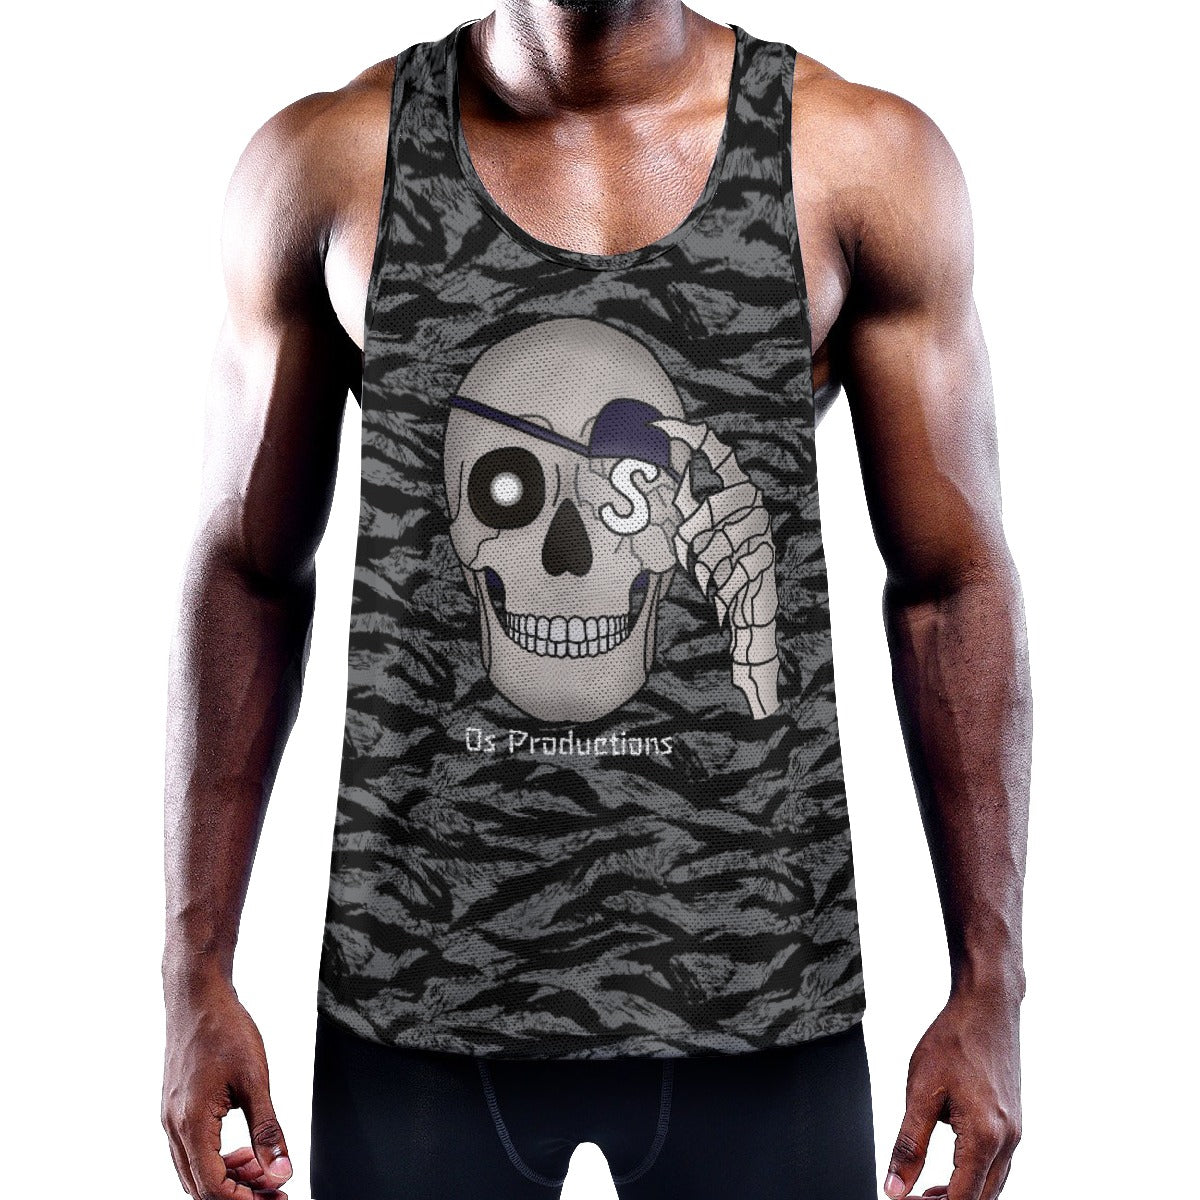 OS Productions Tank Top